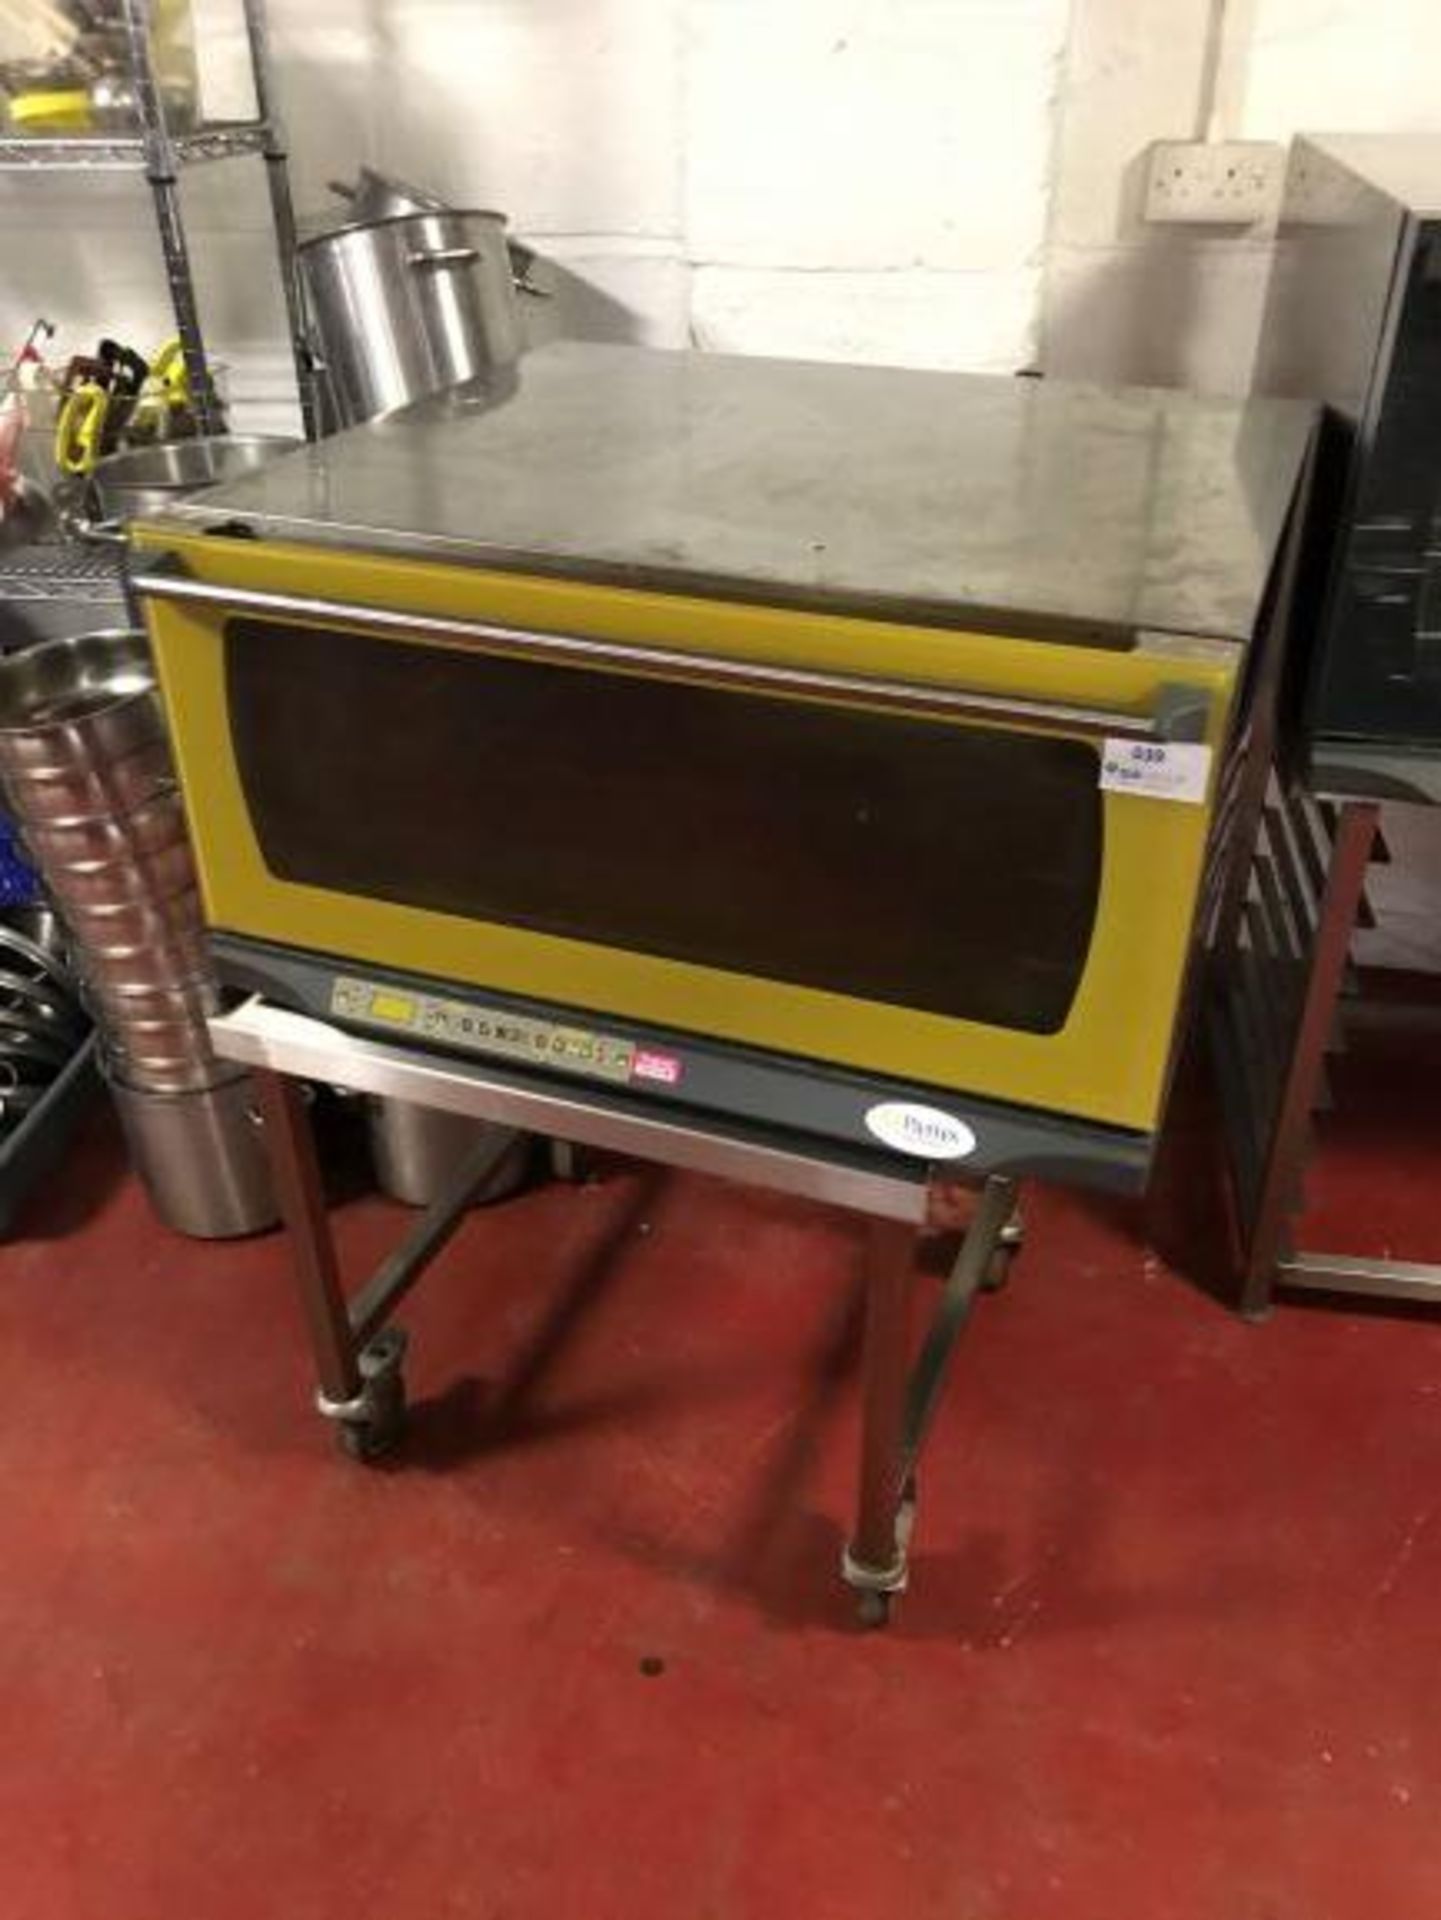 Unox Elena XF185GB electric convention oven with humidity including mobile stainless steel stand - Image 2 of 5